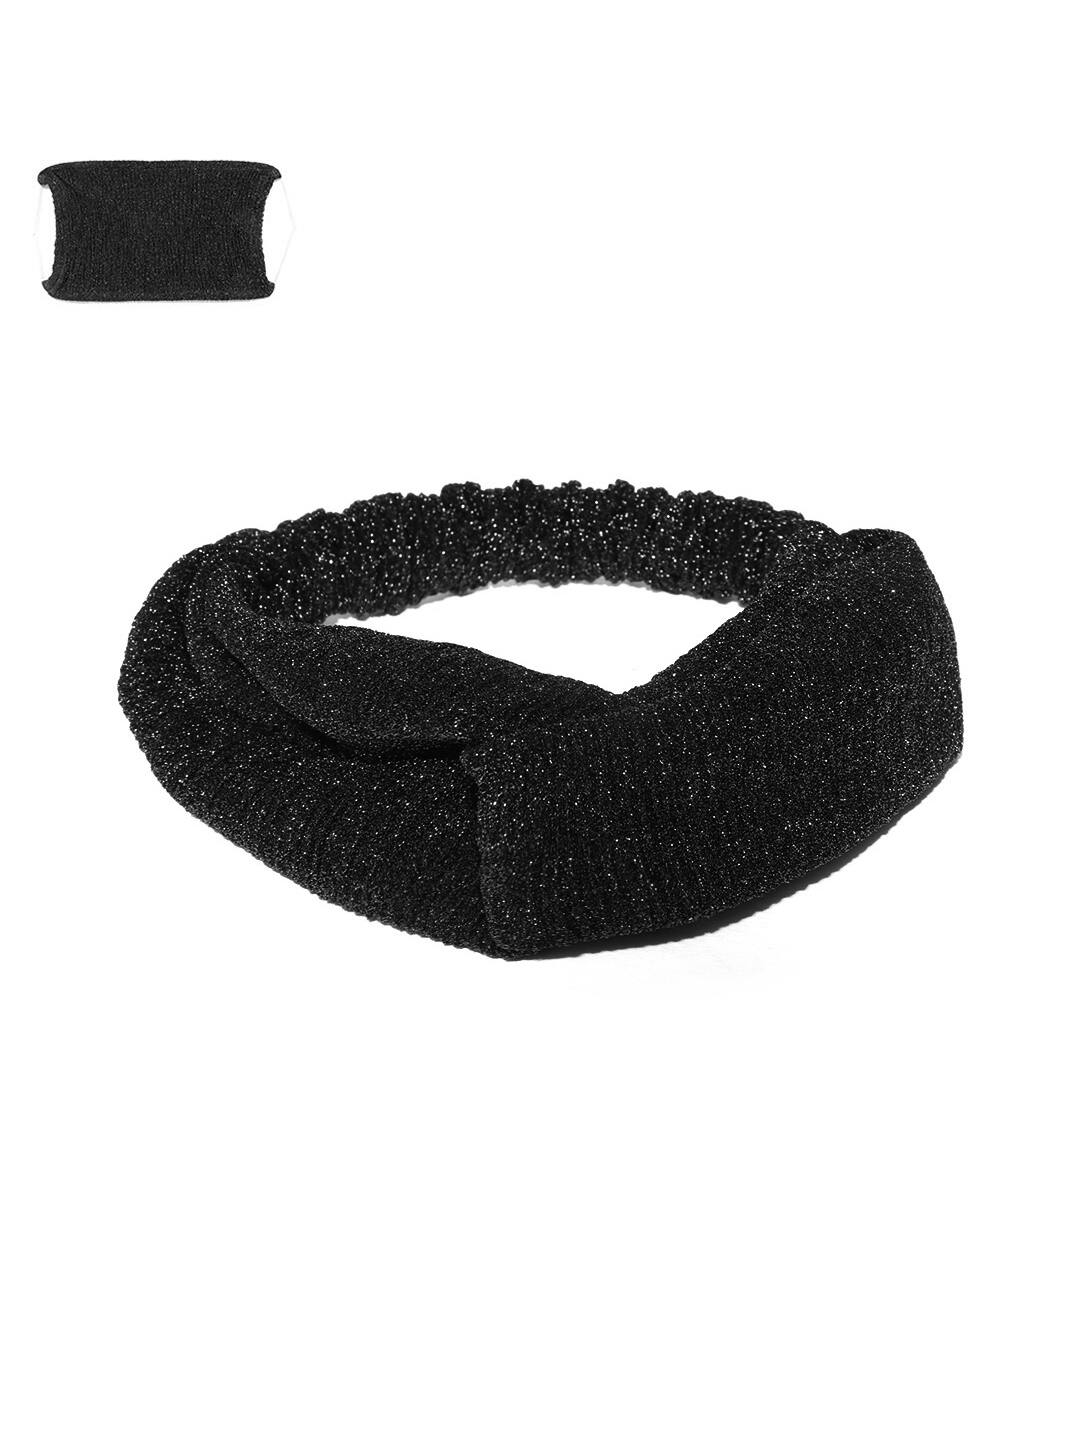 Blueberry glimmer black knot hairband with reusable mask combo